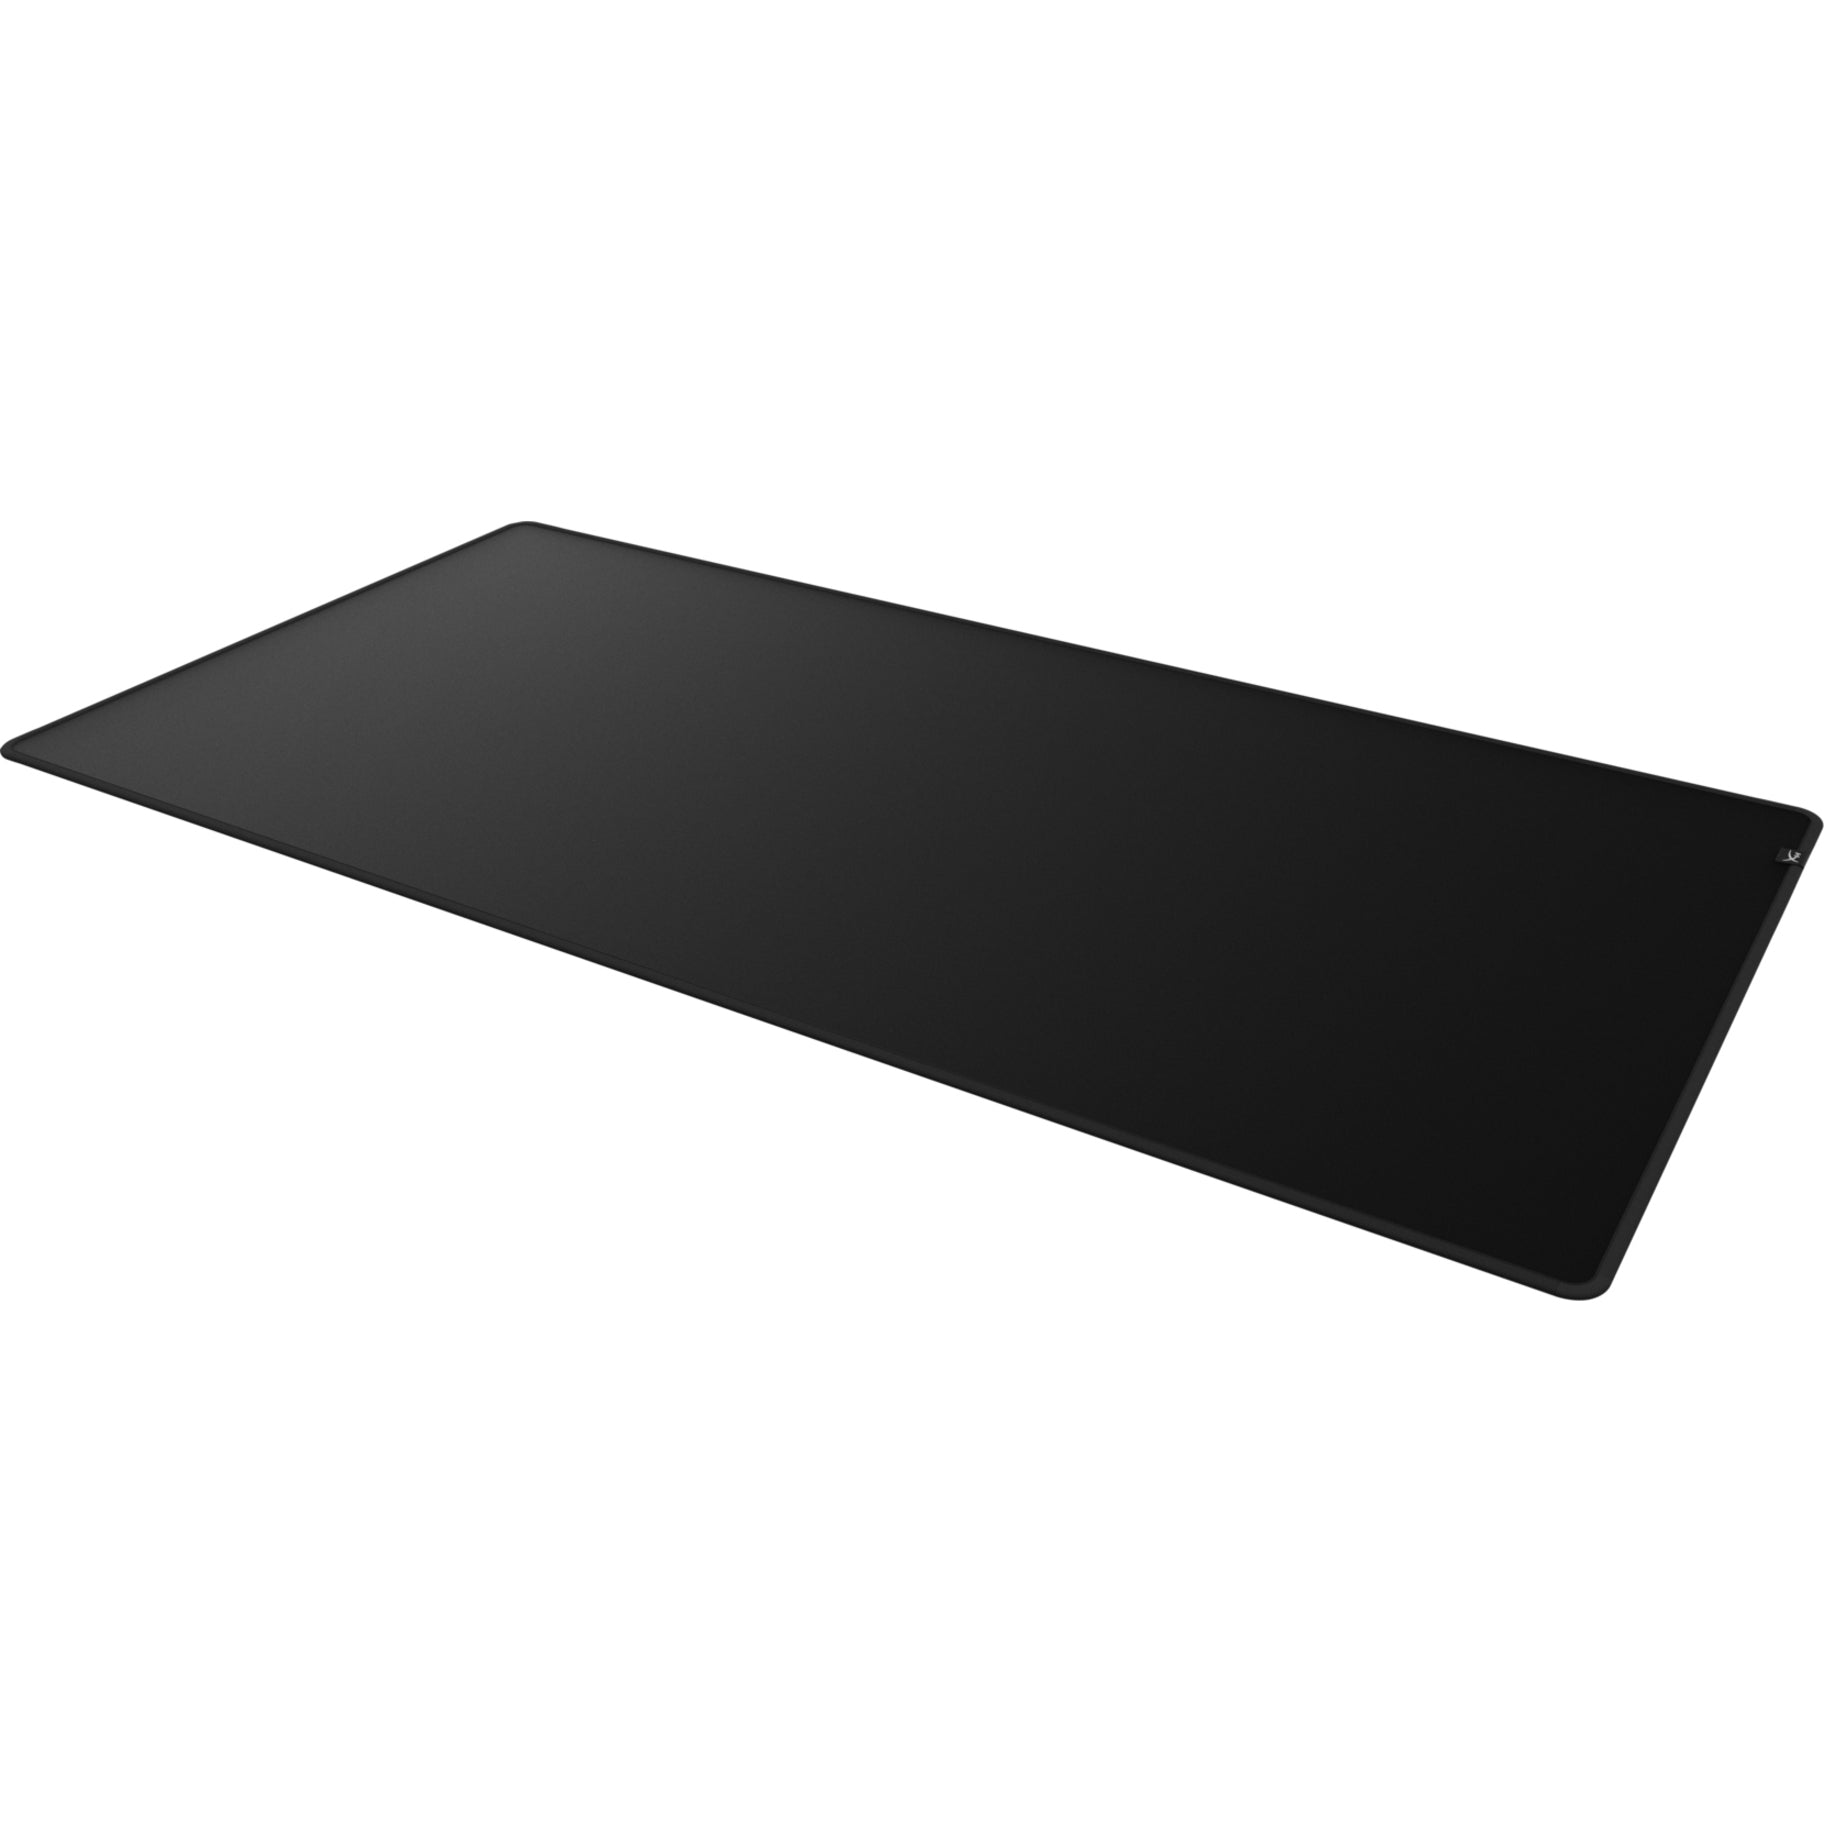 HyperX 4Z7X6AA Pulsefire Mat Gaming Mouse Pad - Cloth (2XL), Tear Resistant, Anti-fray, Anti-slip, Wear Resistant, Textured